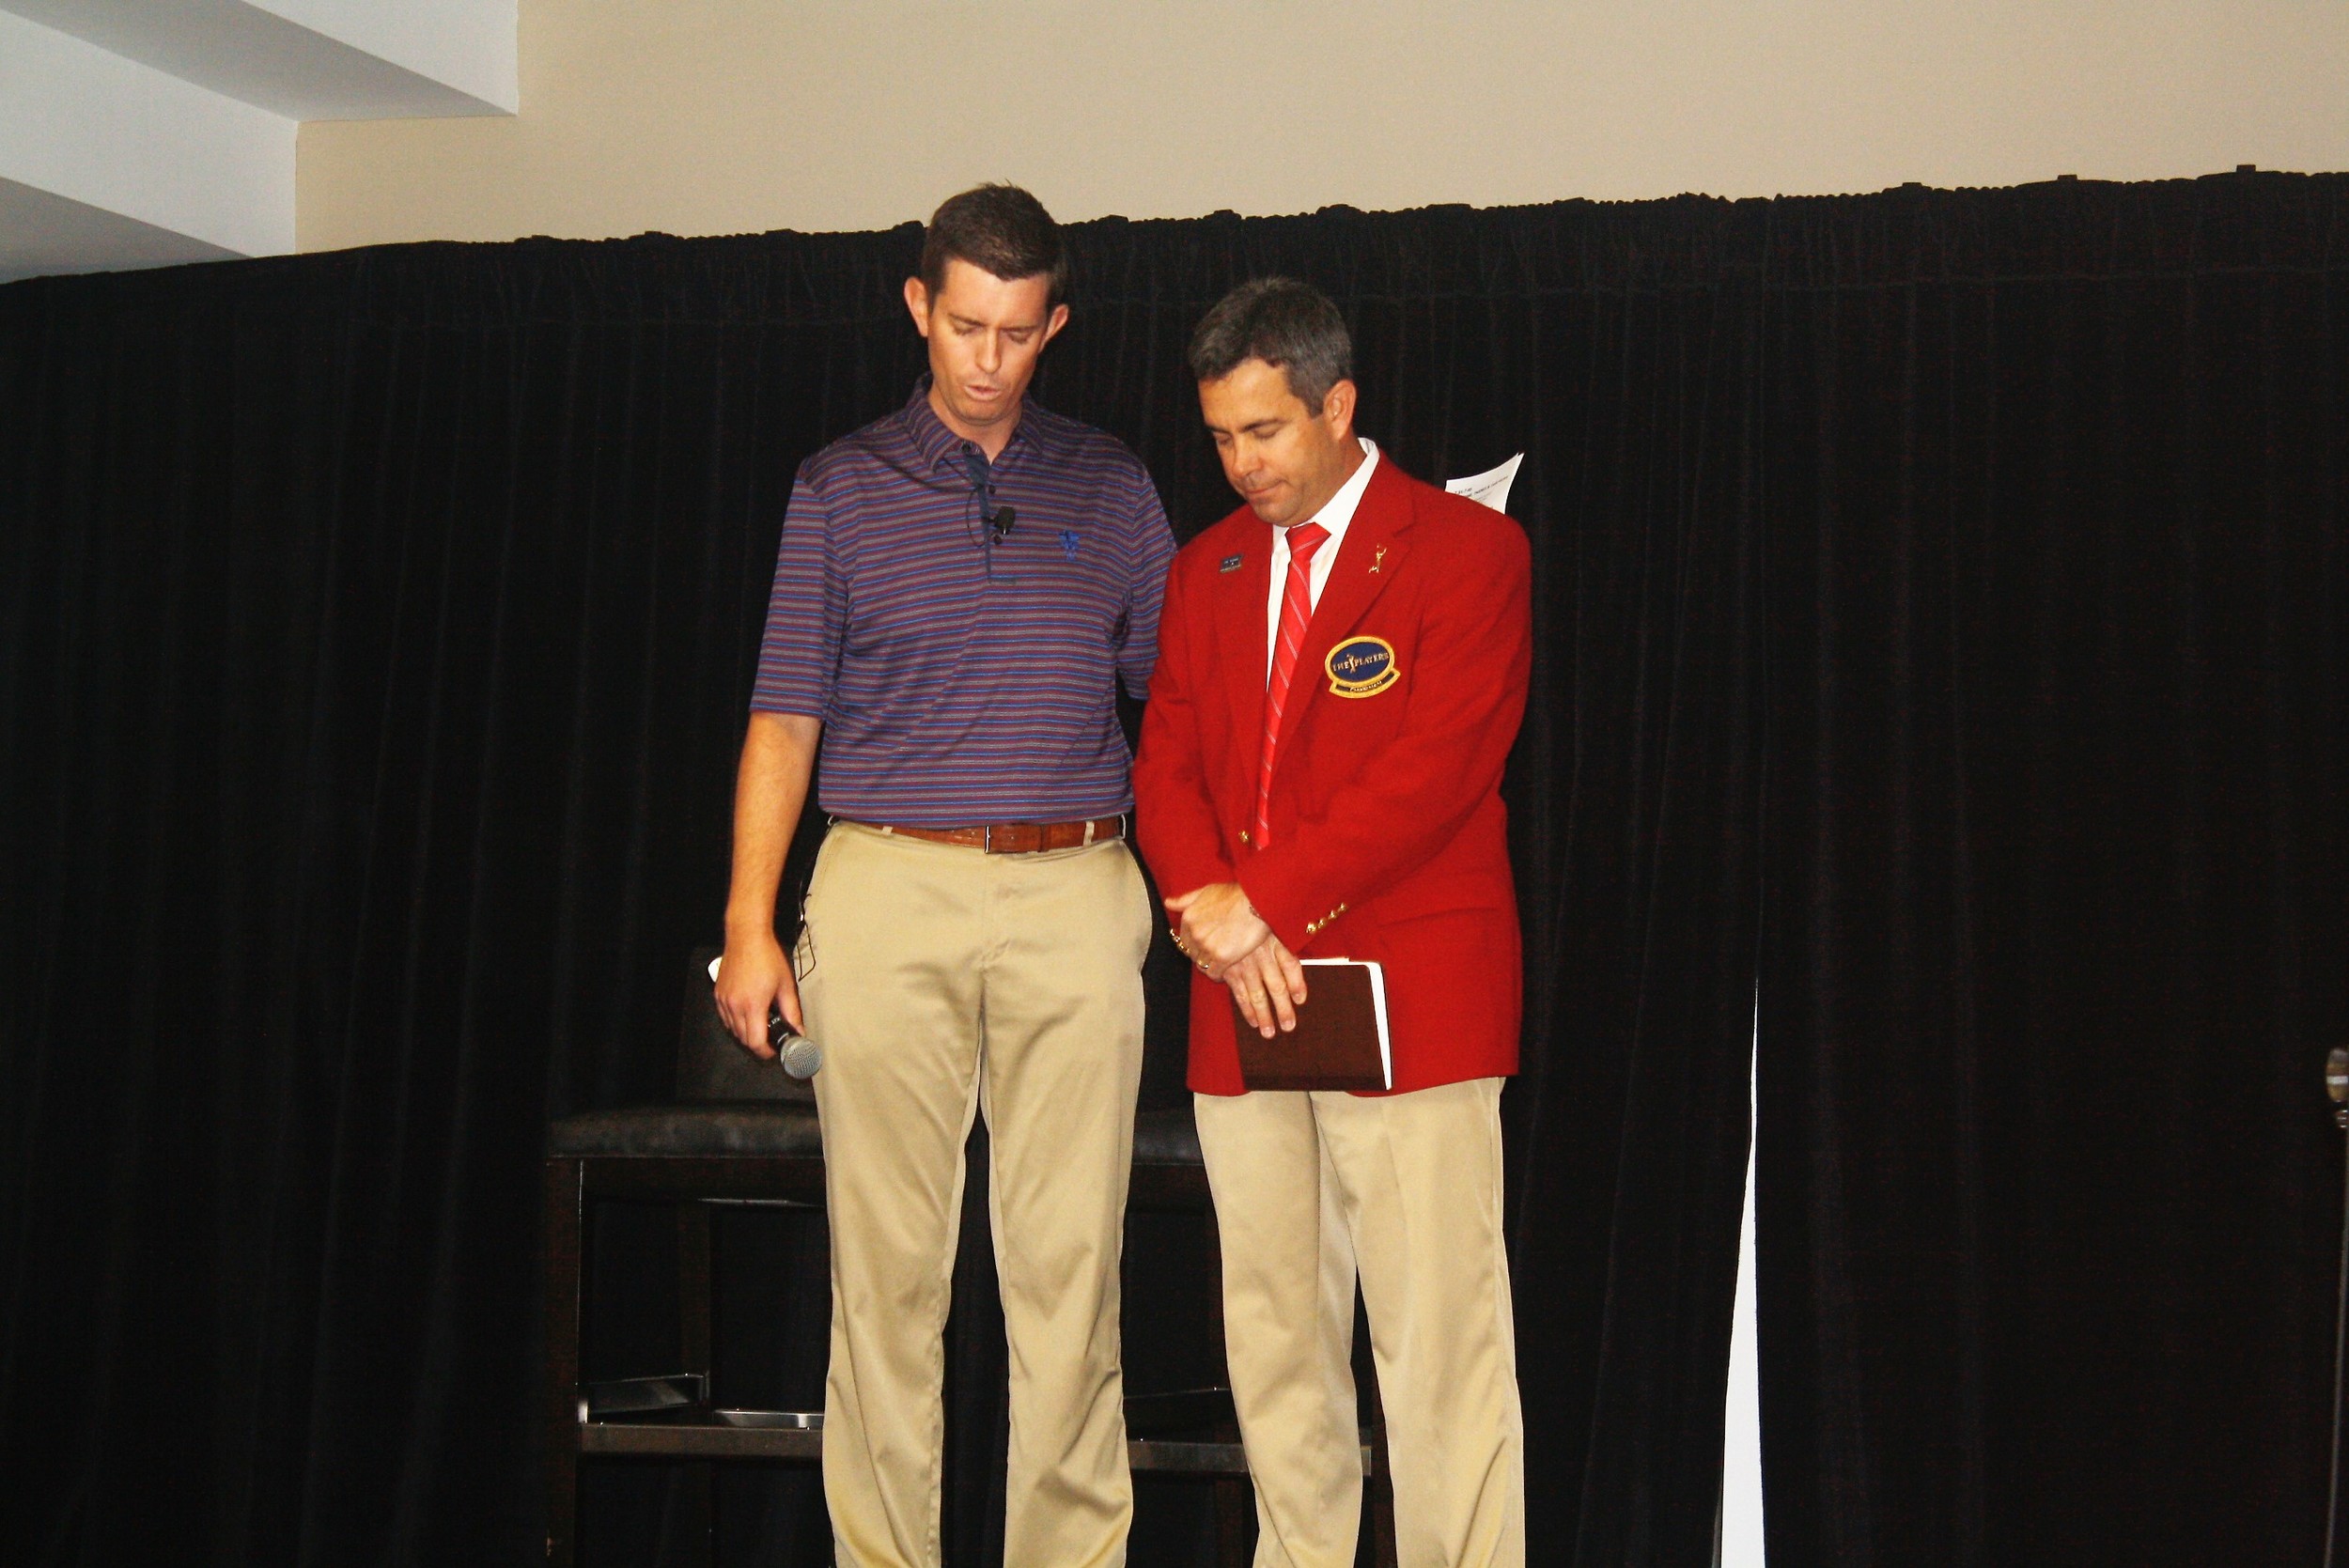 Matt Roop leads guests in prayer for Tournament Chairman Kevin English and THE PLAYERS' 2,000 volunteers.